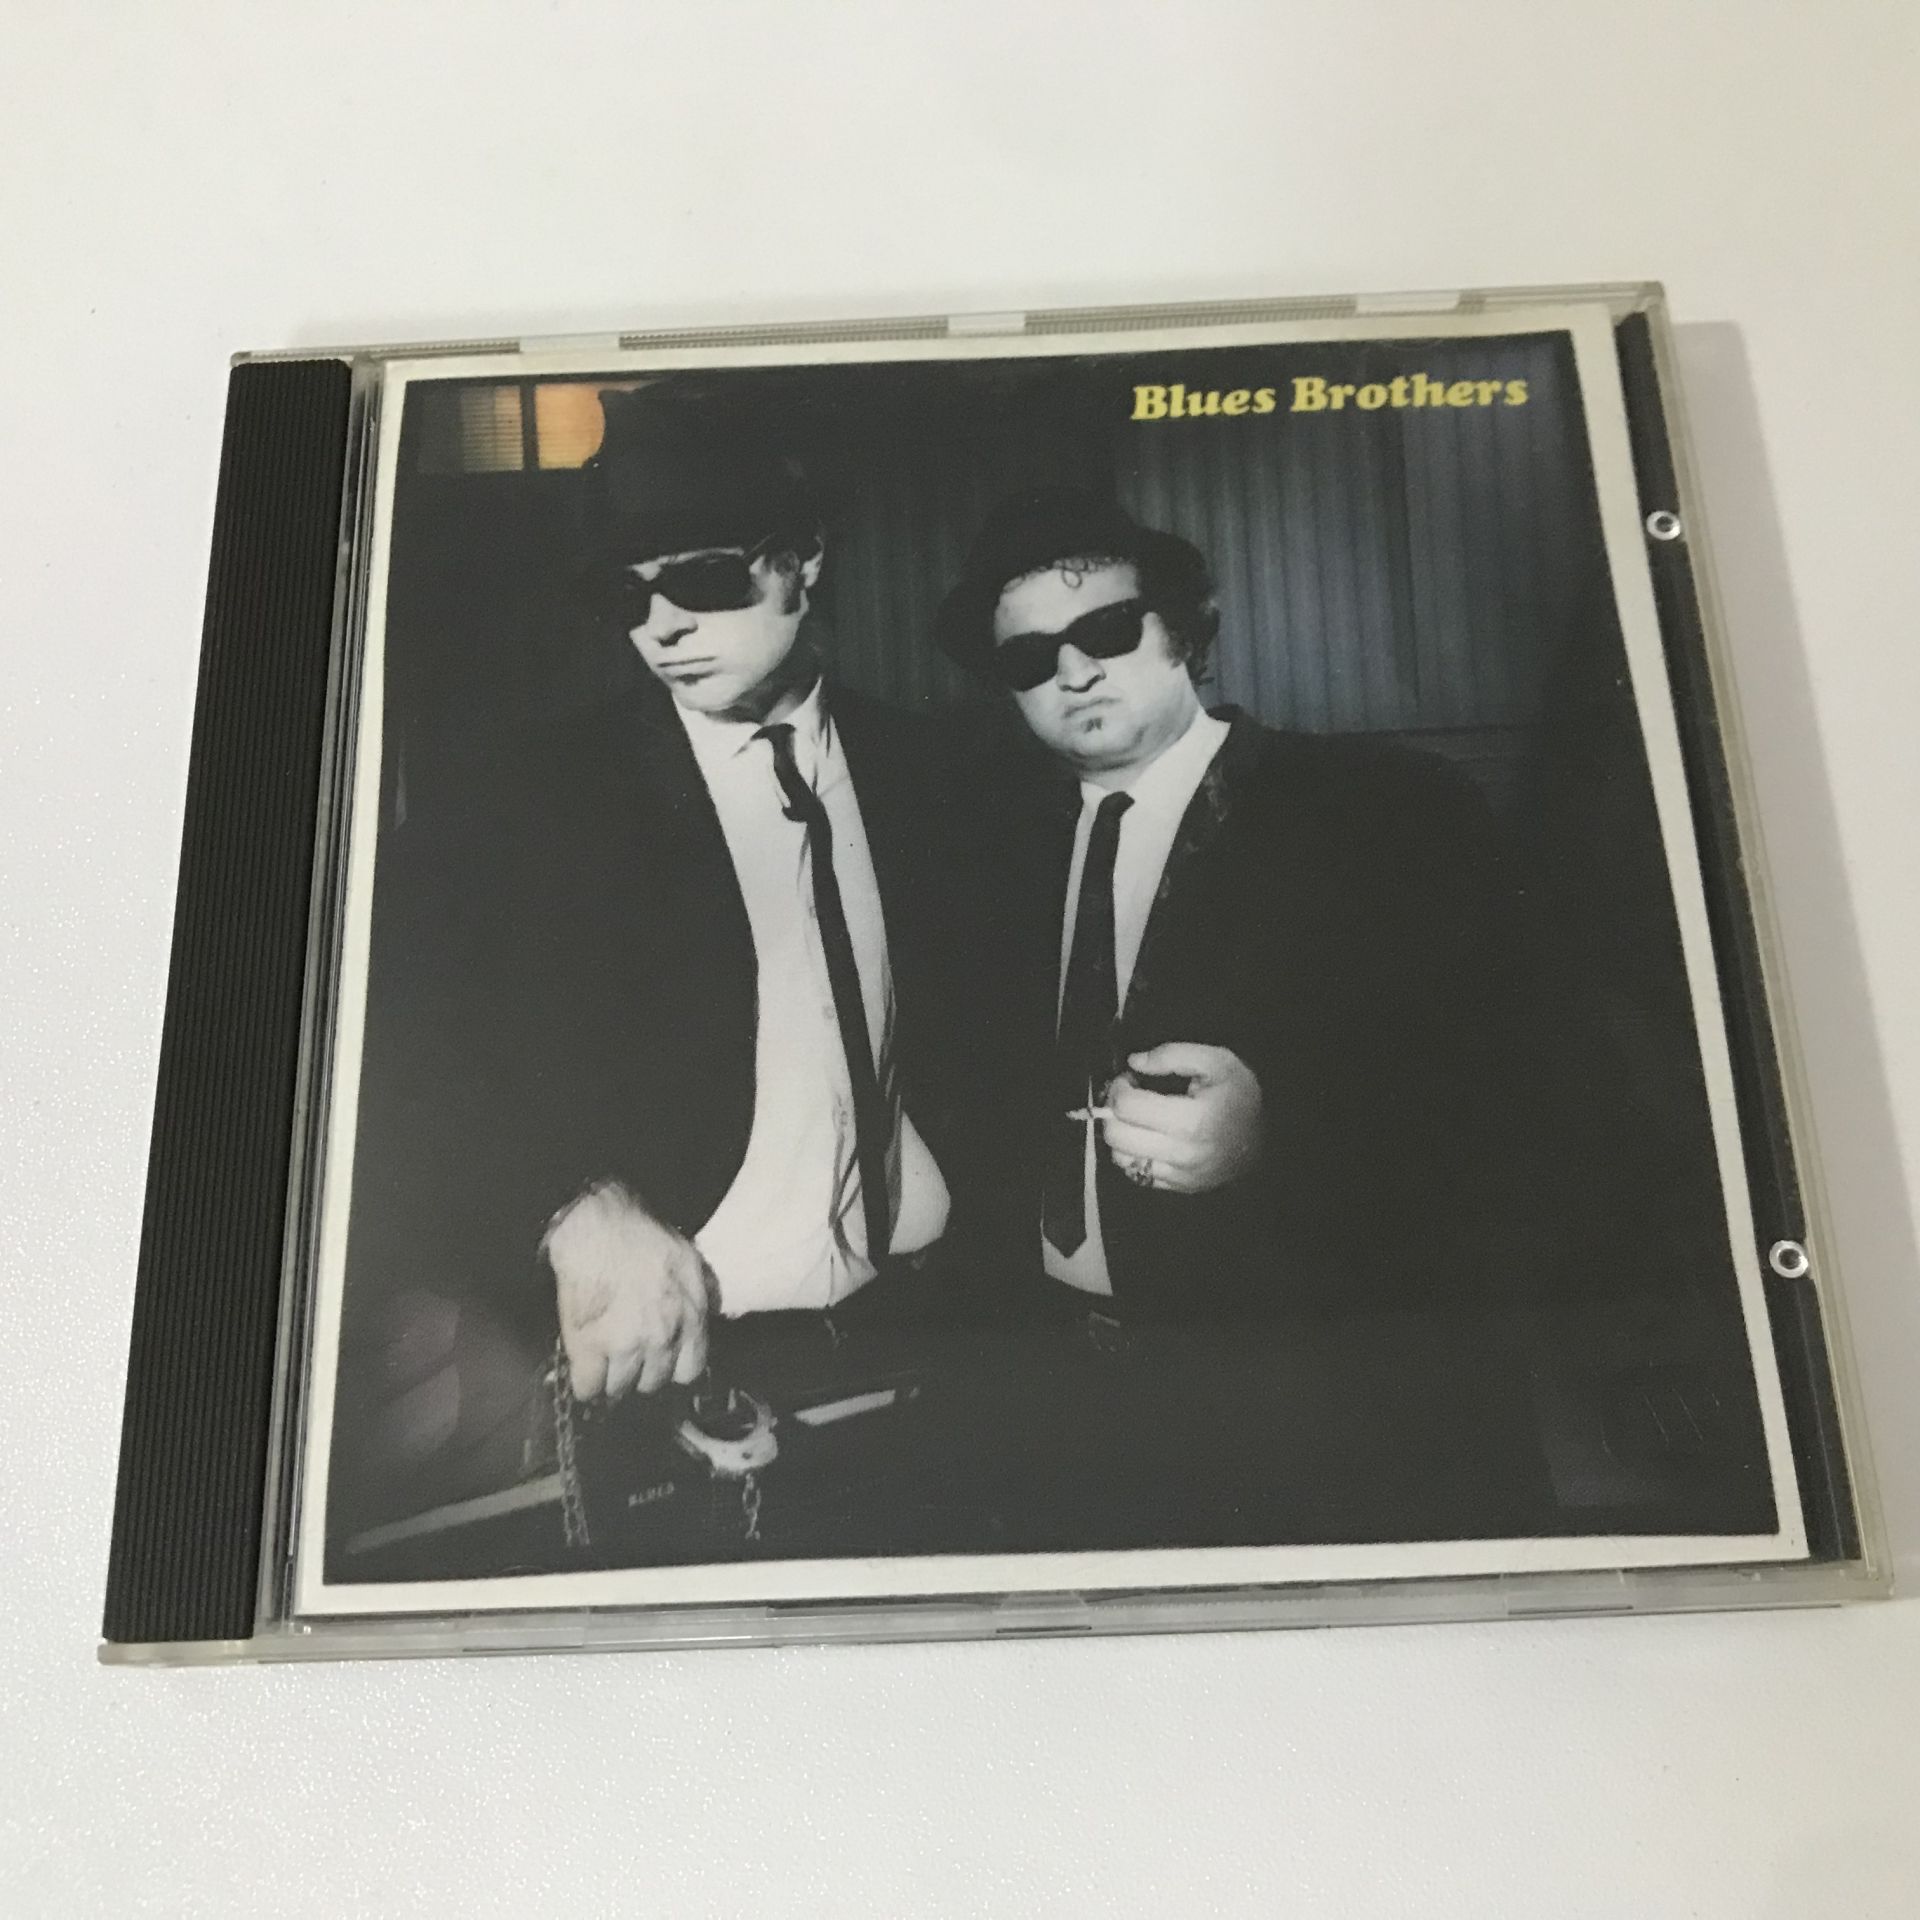 Blues Brothers – Briefcase Full Of Blues